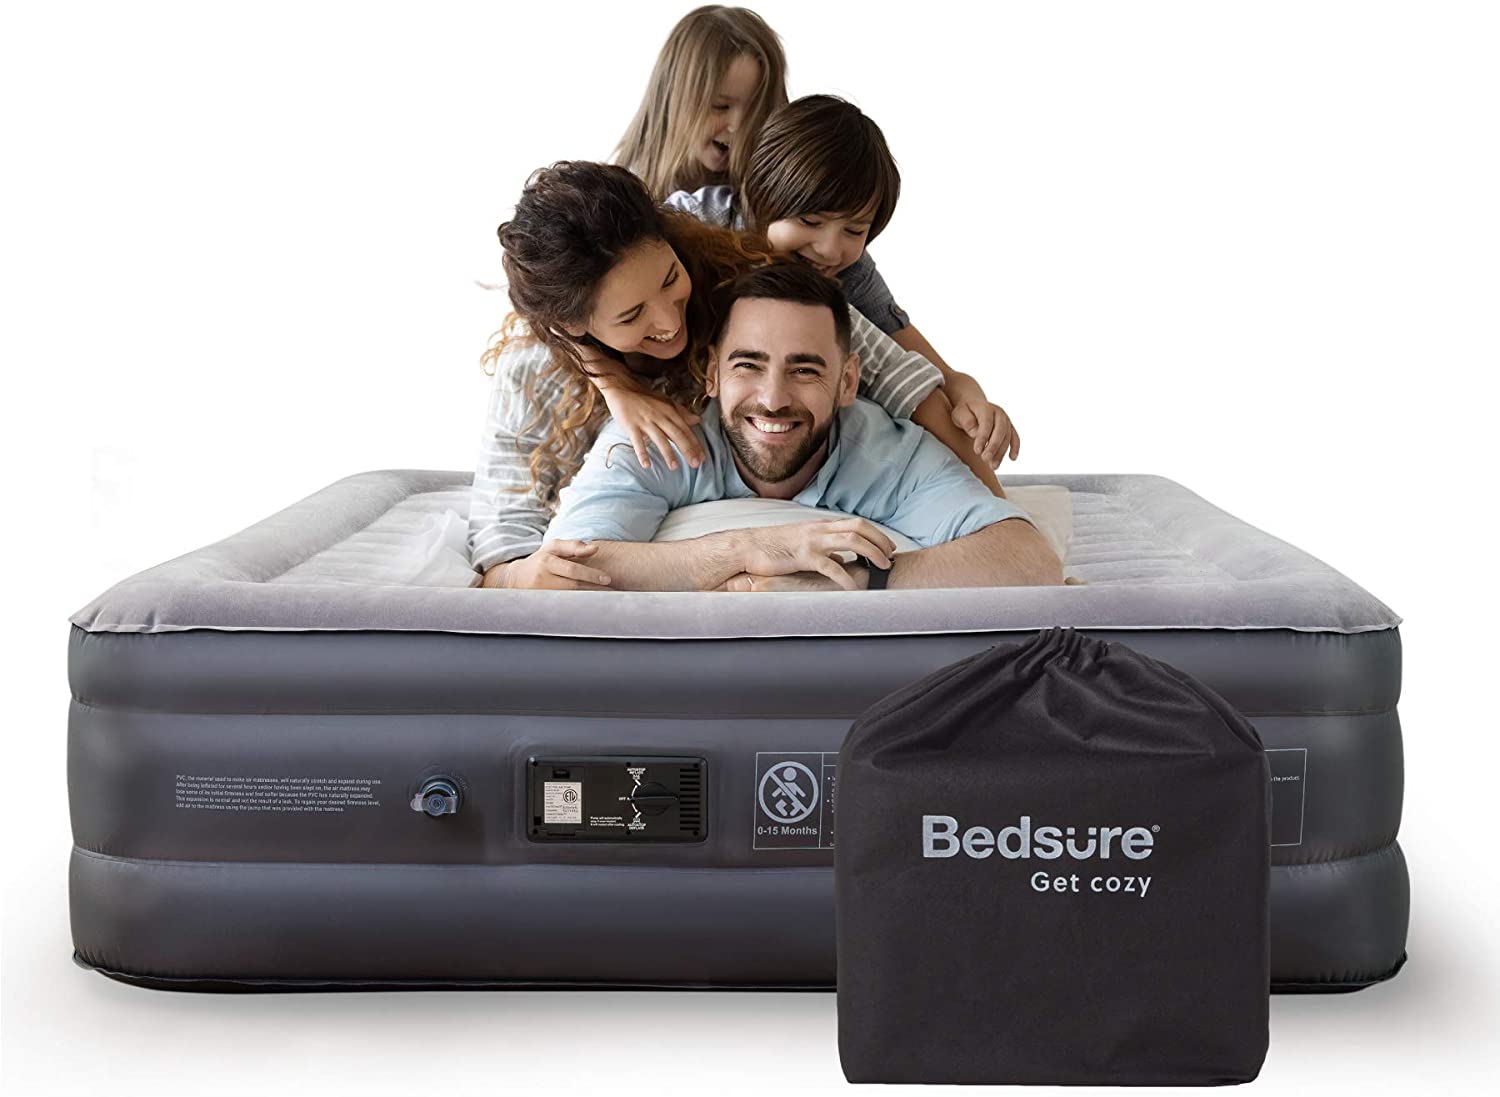 A queen size air bed like this one offers extra space for two people, and has a built-in pump for easy inflation.